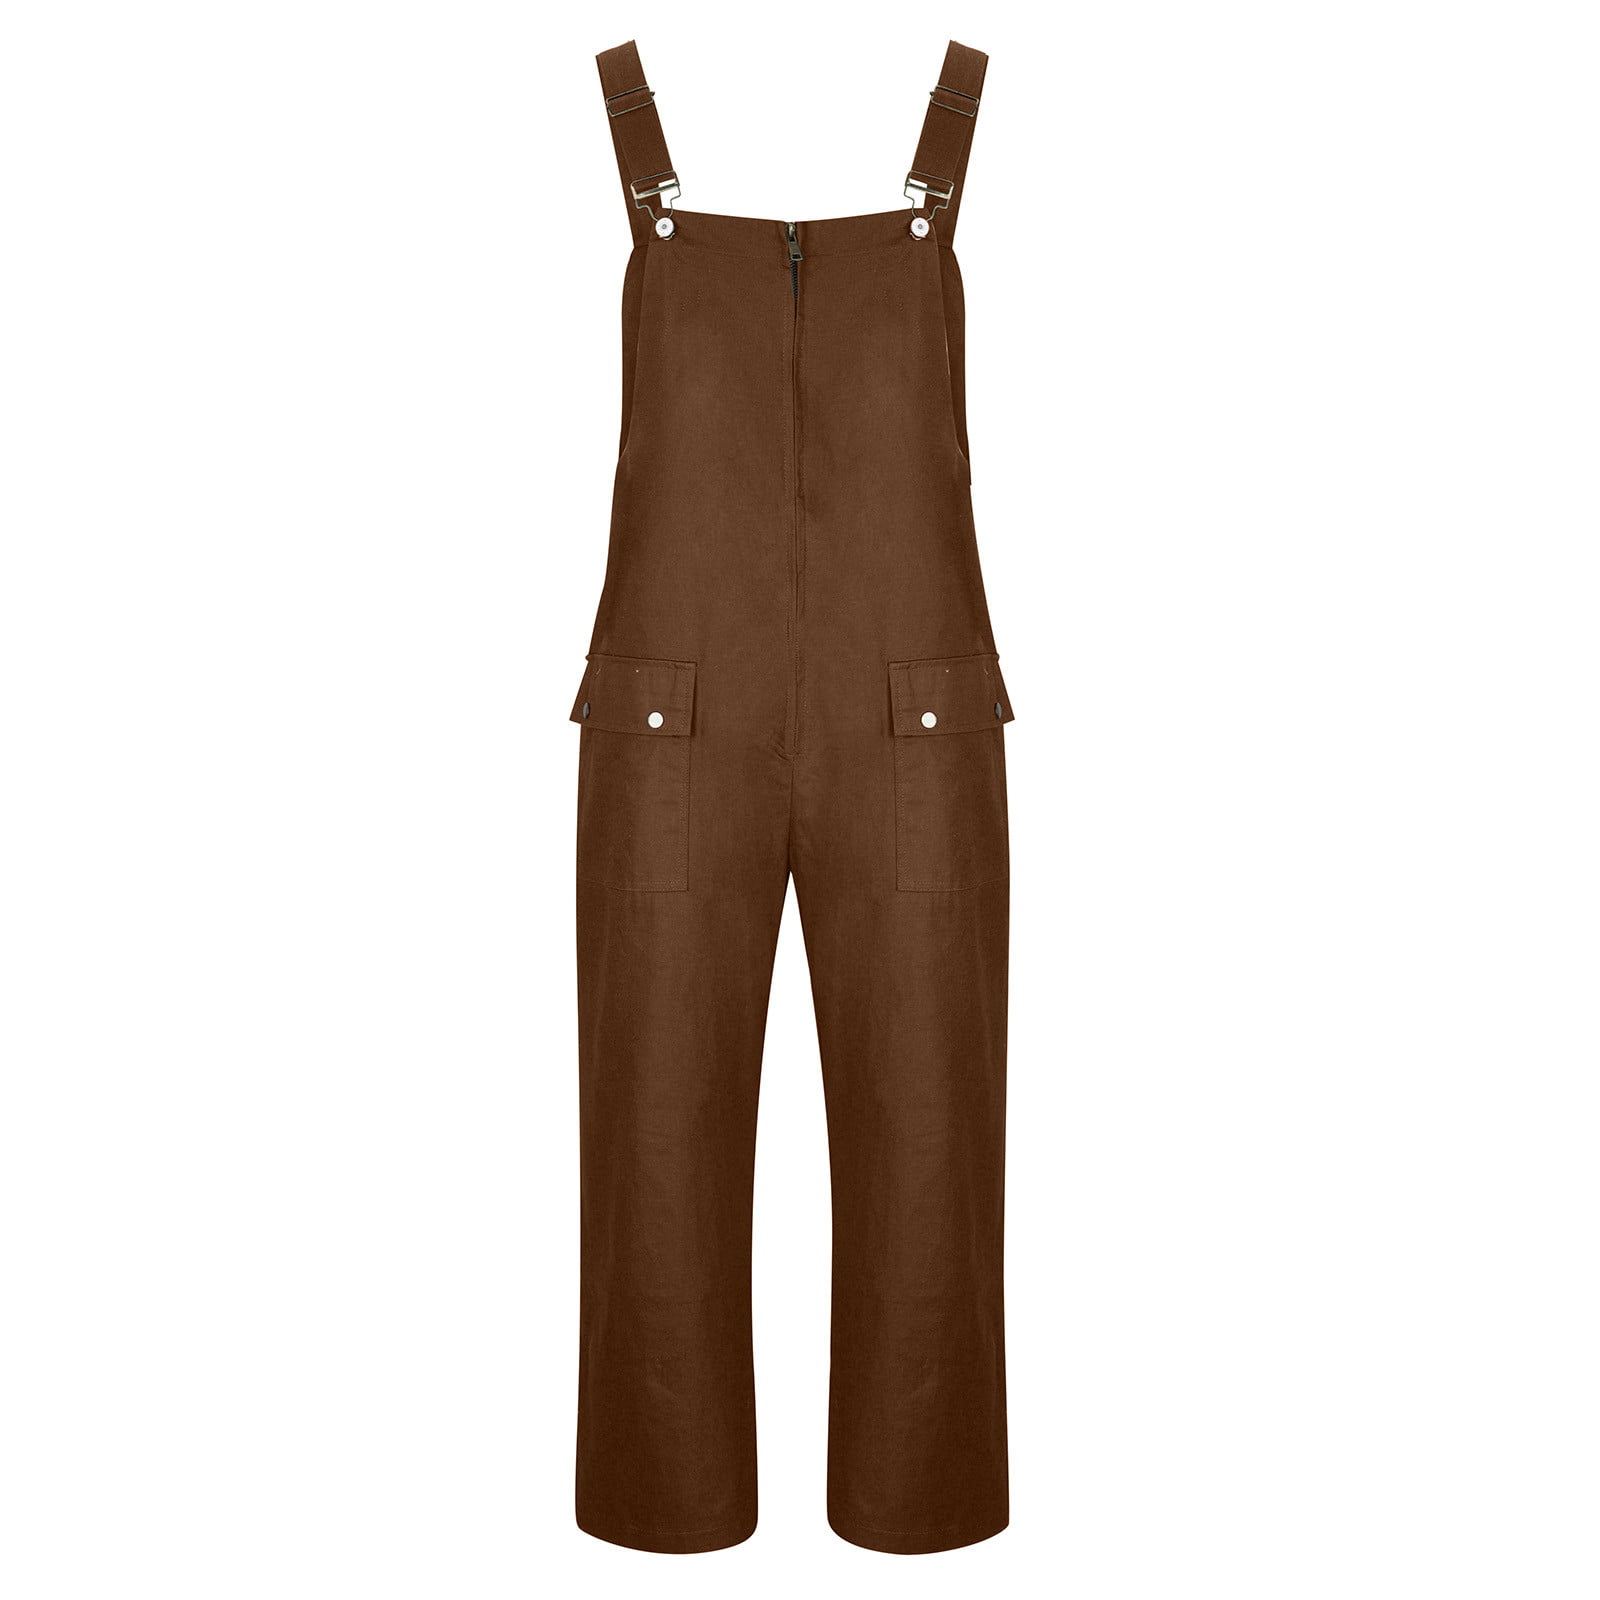 jsaierl Mens Work Bib Overalls Baggy Lightweight Jumpsuit Big and Tall  Coveralls Loose Fit Cargo Workwear with Snaps Pockets 